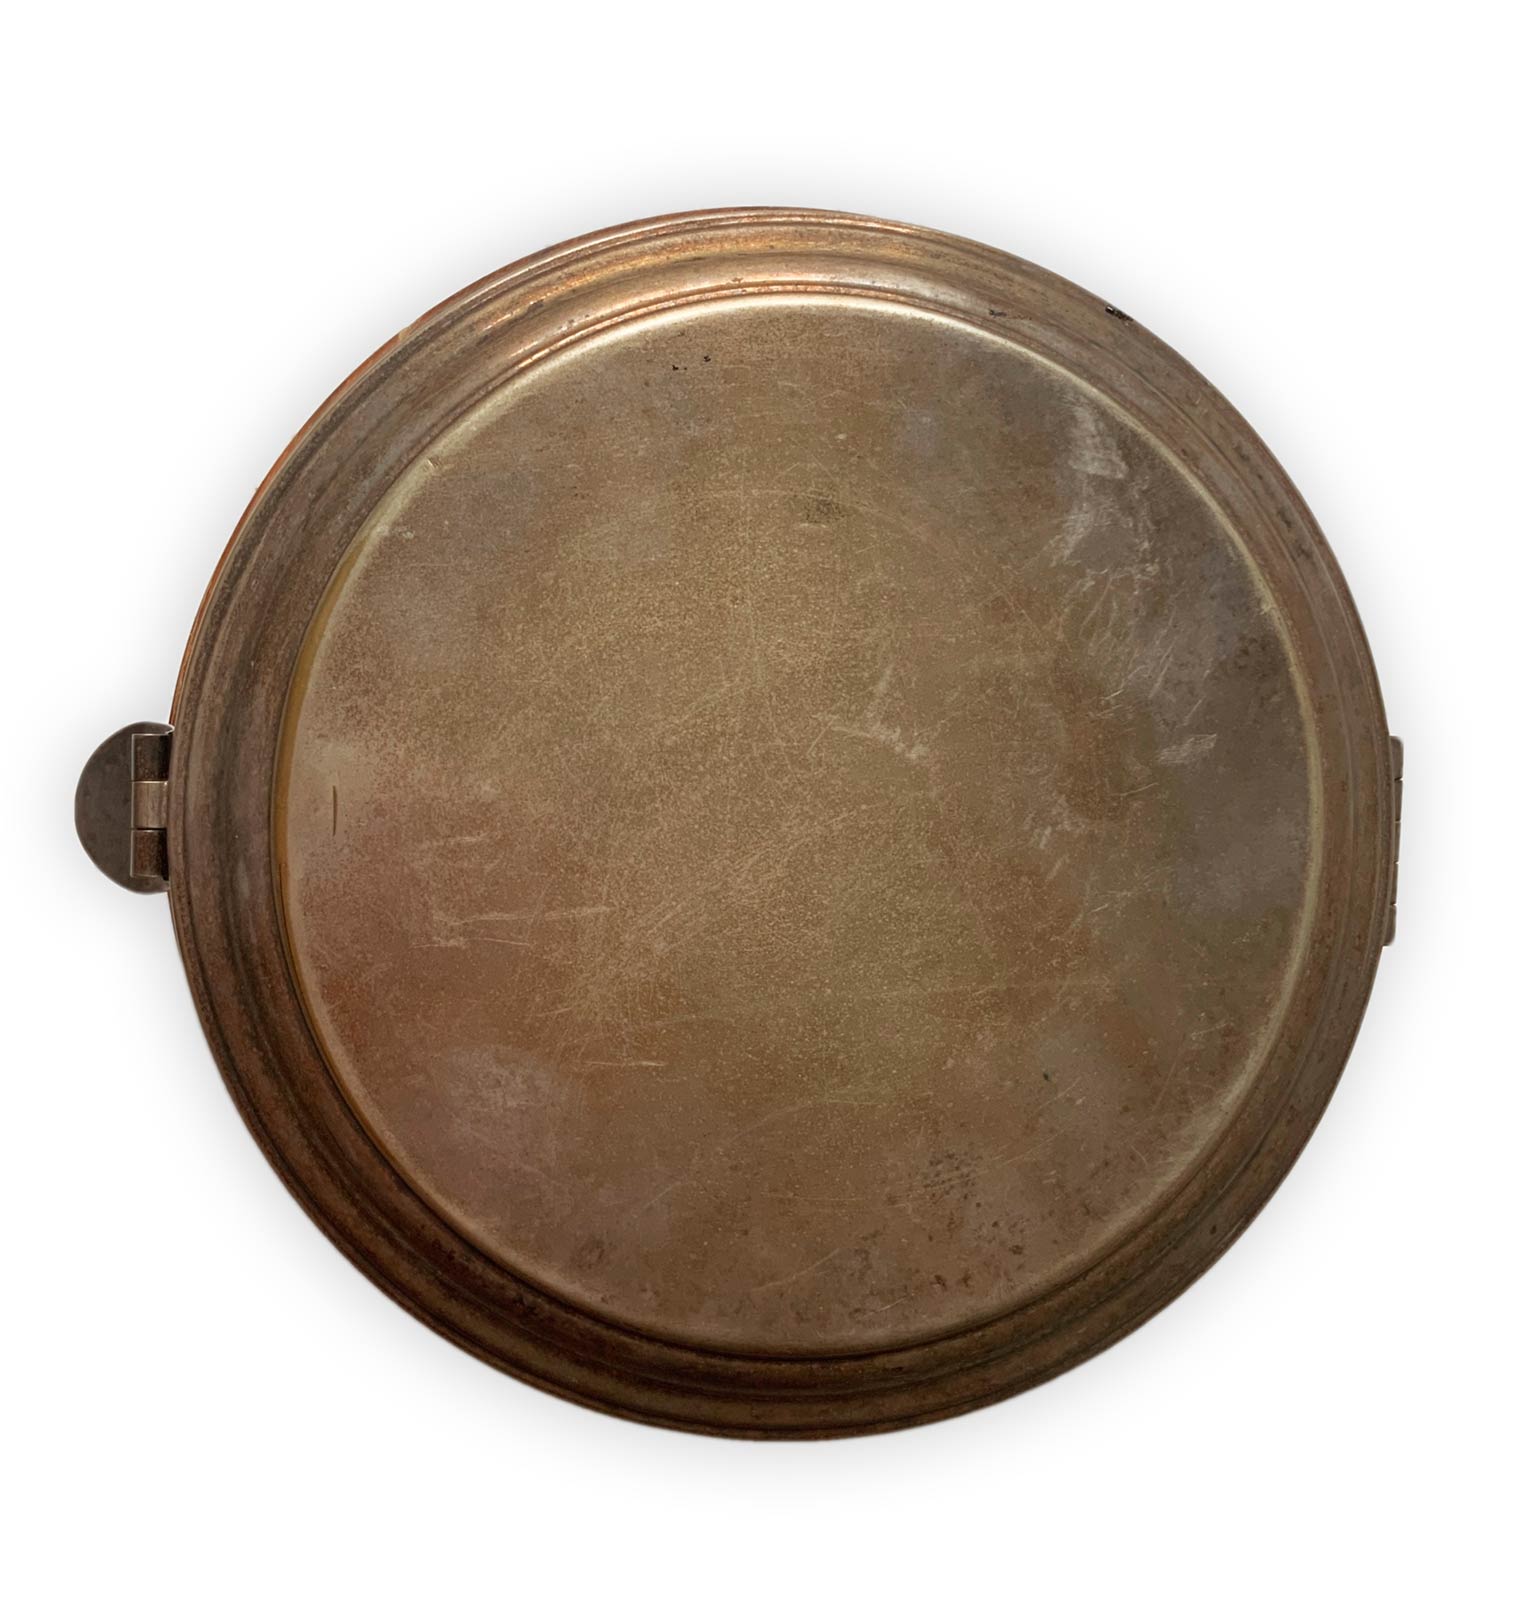 Italian Production, compost in a circular base form of walnut and silver metal lid, Wear and tear. - Image 5 of 5